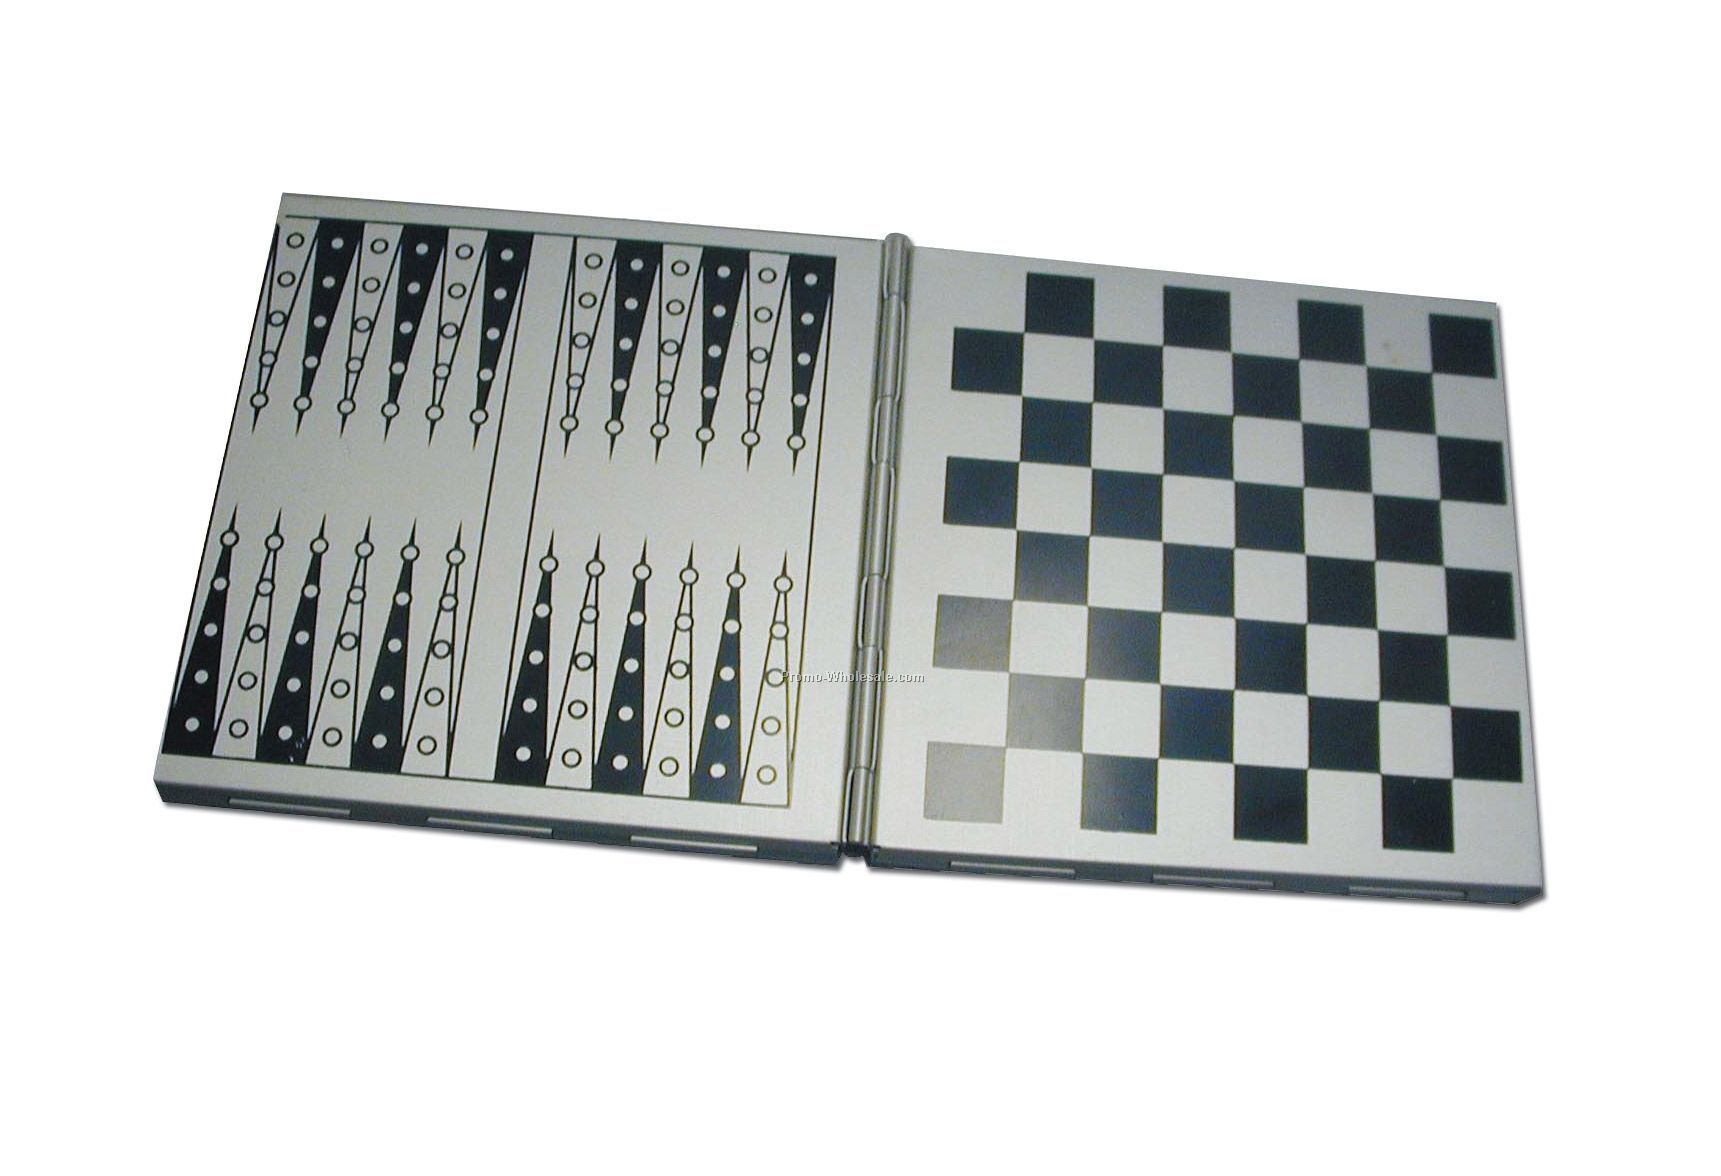 Magnetic 3-in-1 Metal Case Chess/Checkers/Backgammon Set